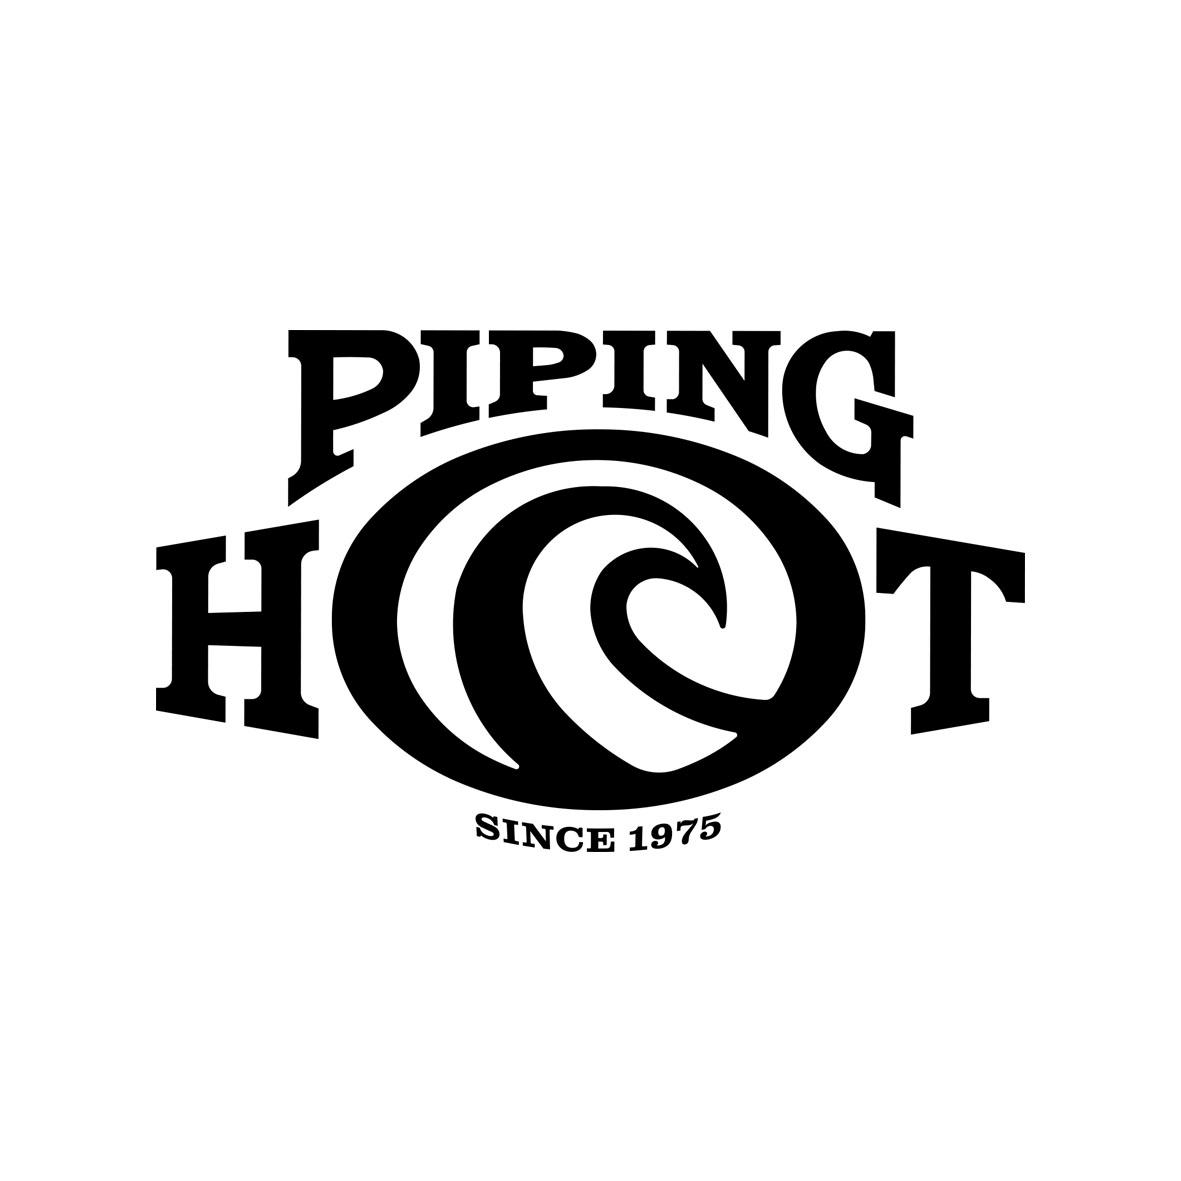 piping hot since 1975 商标公告